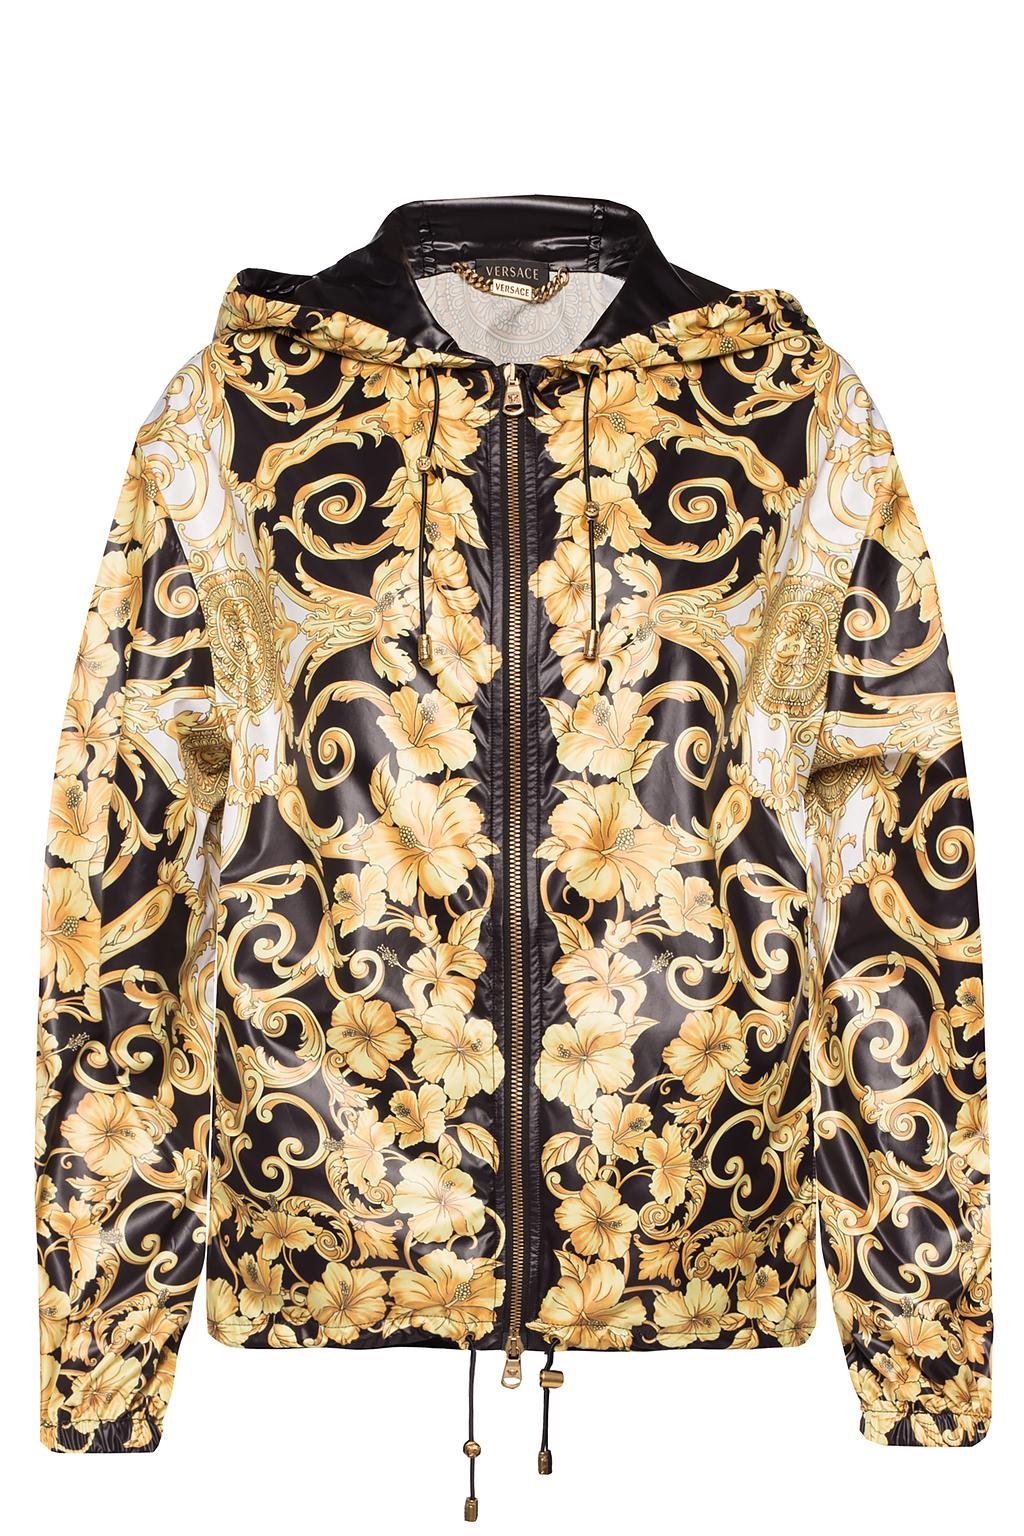 Versace Synthetic Patterned Jacket in Yellow - Lyst